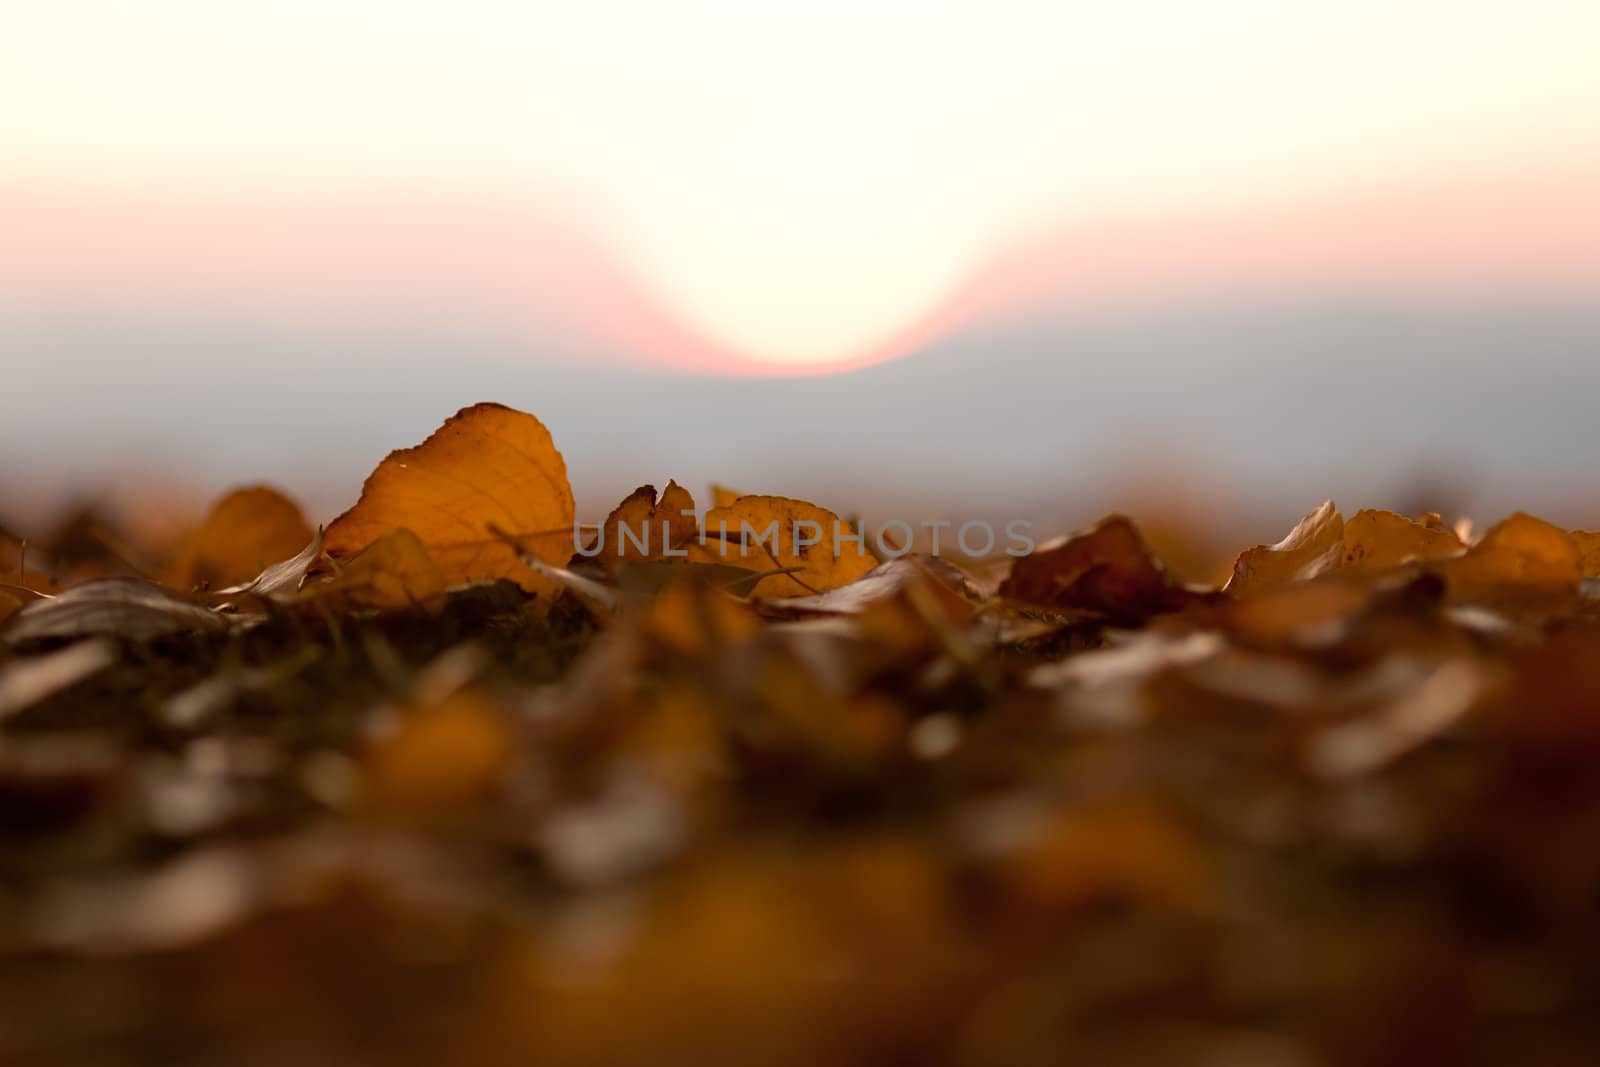 Autumn Leaves and Sunset, Selective Focus